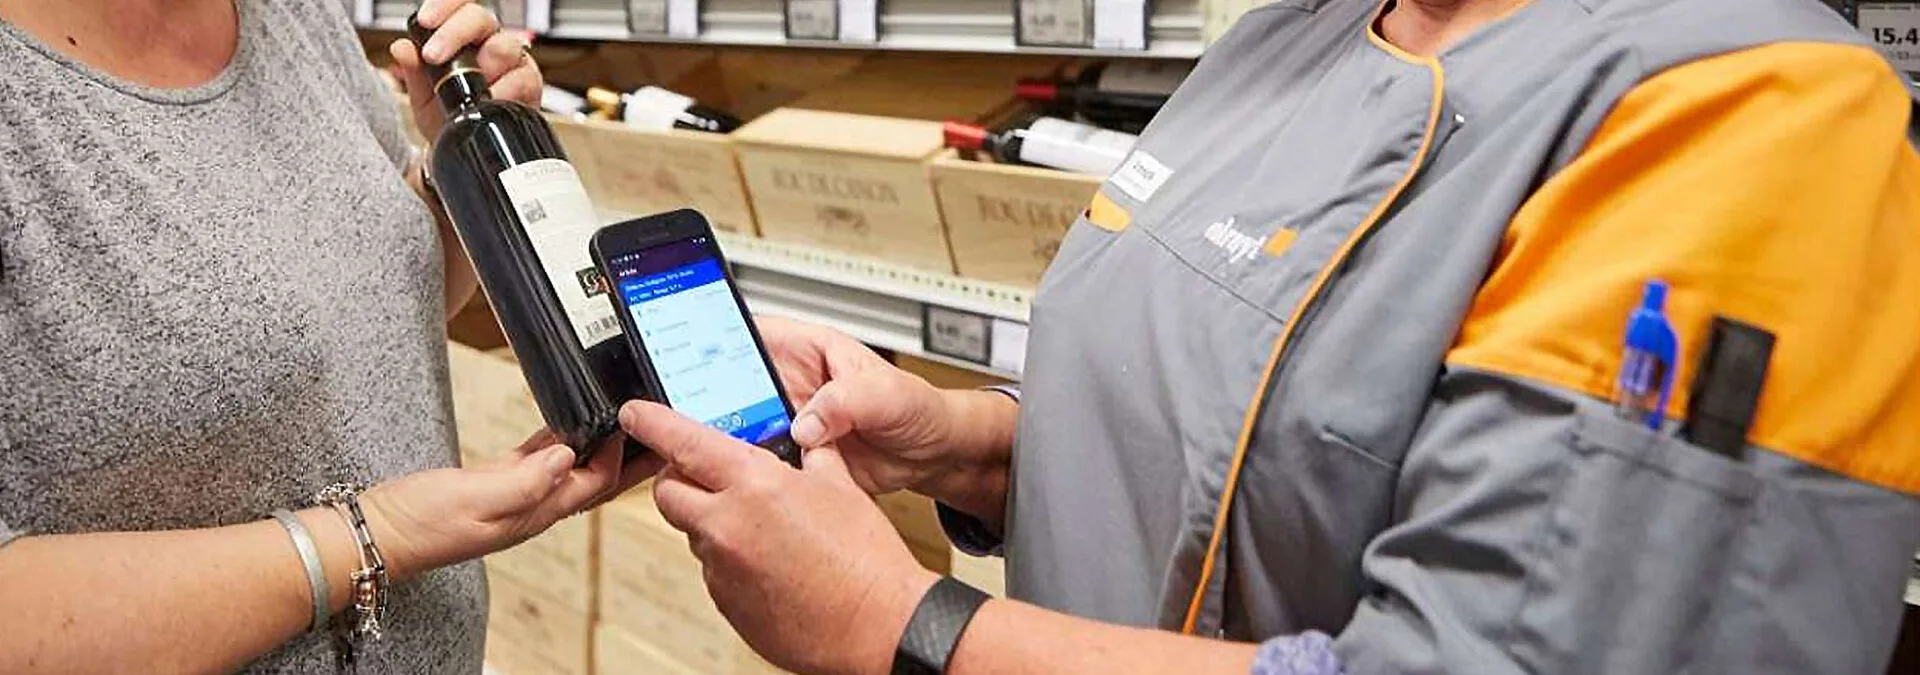  Smartphone Scanning Revolutionizes Retail Operations at Colruyt - IoT ONE Case Study